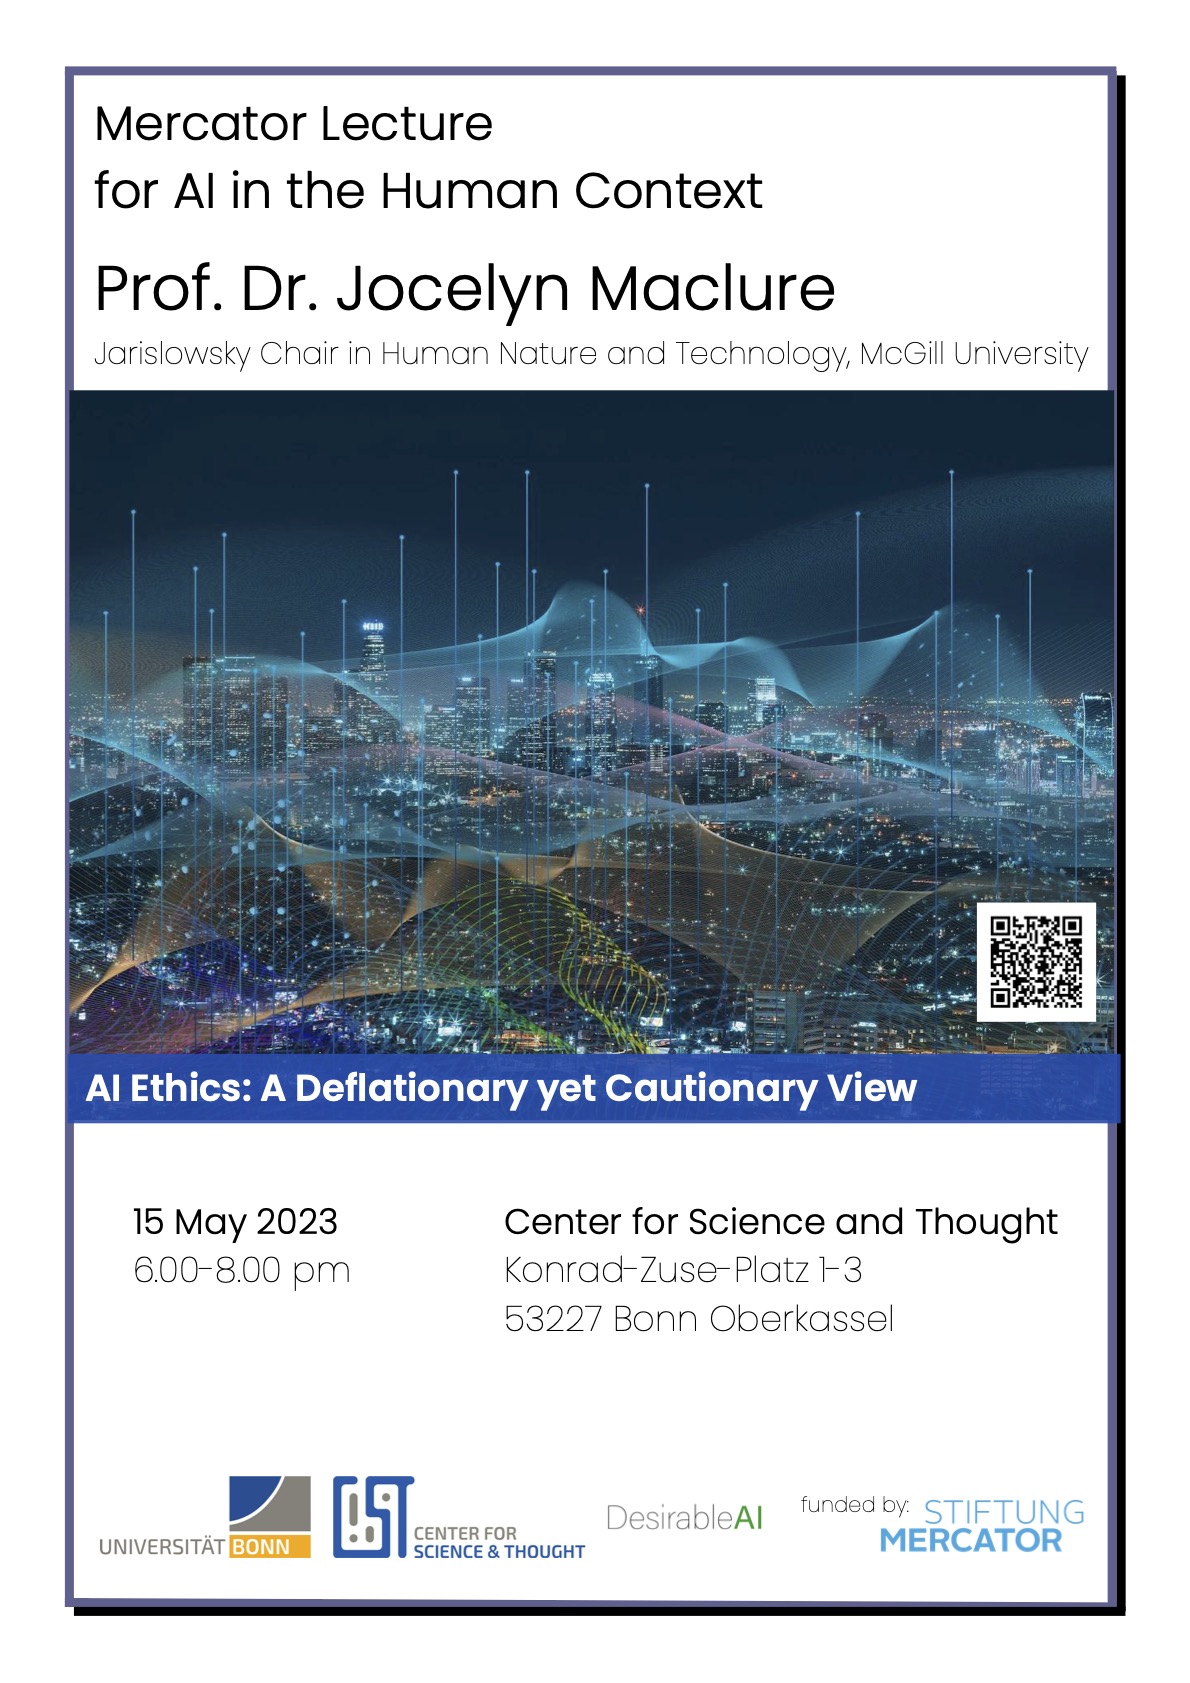 Mercator Lecture for AI in the Human Context: Prof. Dr. Jocelyn Maclure